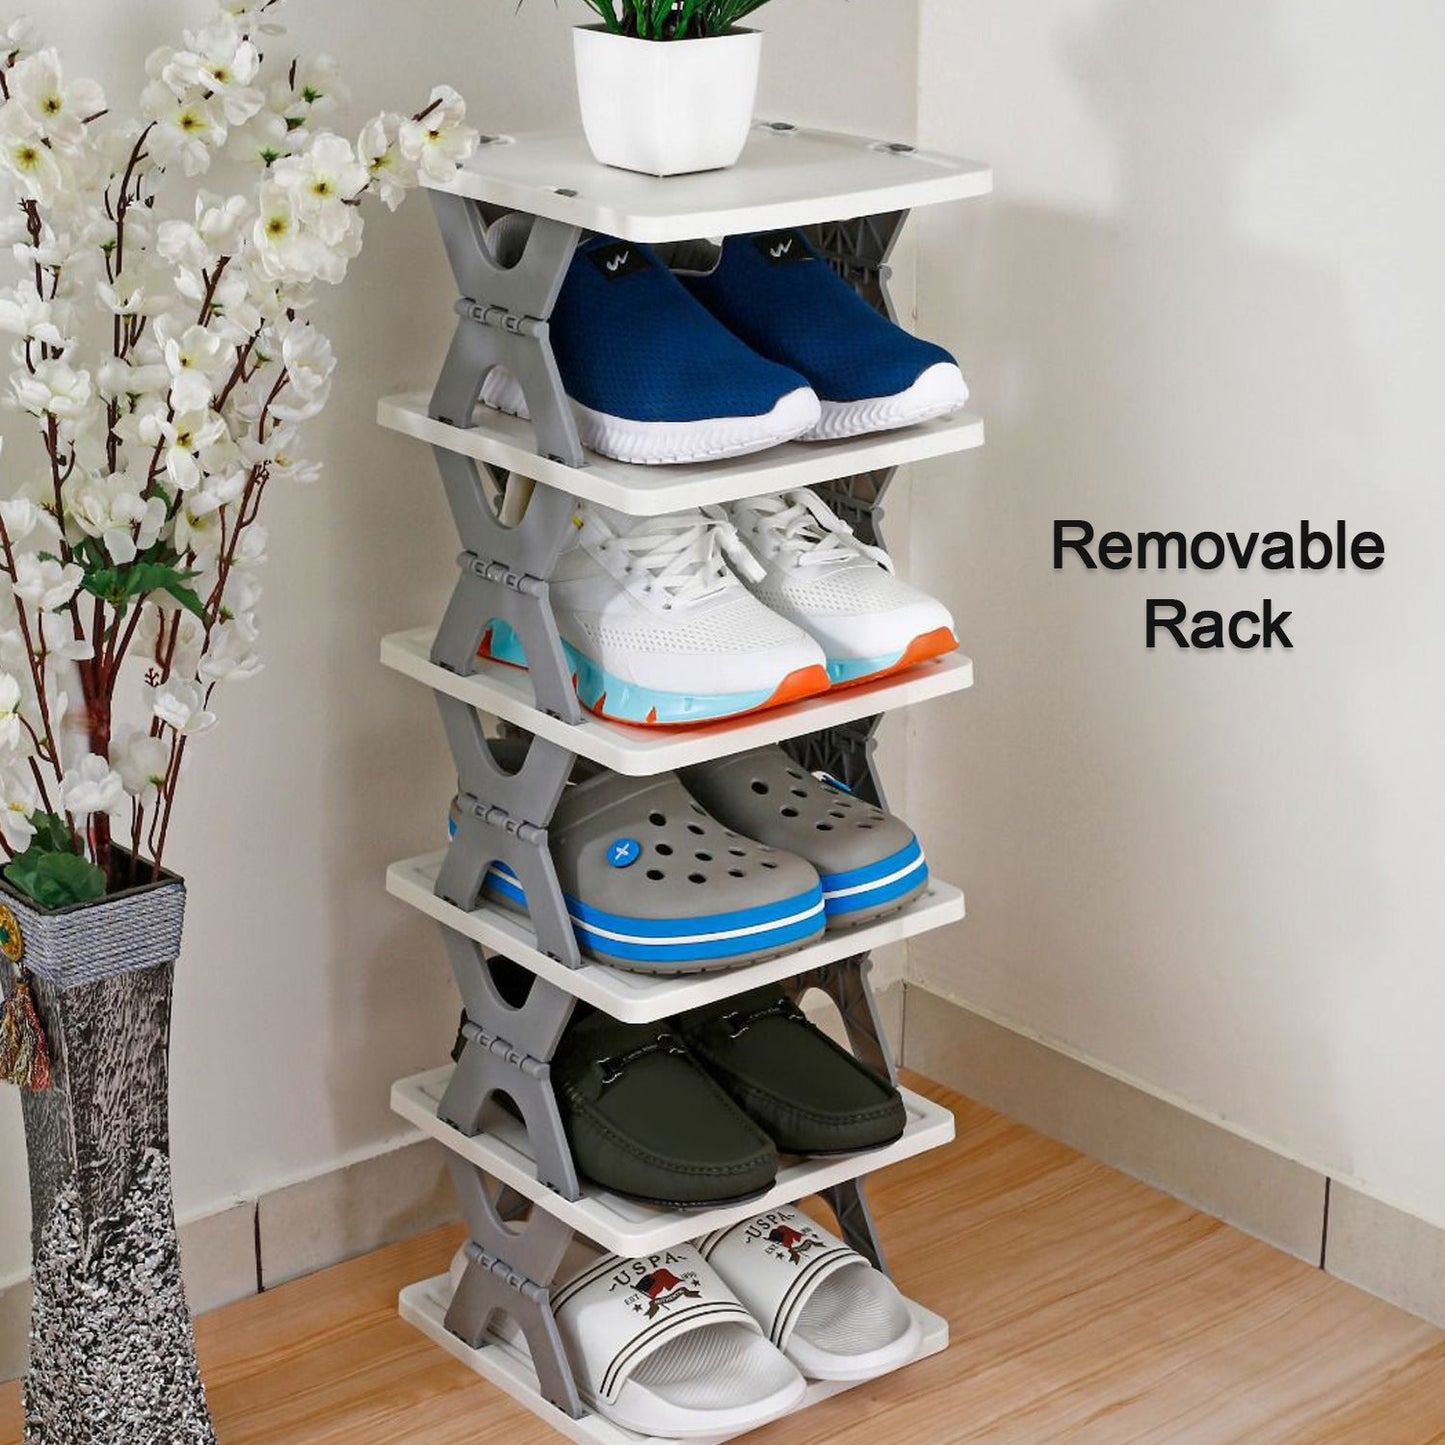 9098  SMART SHOE RACK WITH 8 LAYER SHOES STAND MULTIFUNCTIONAL ENTRYWAY FOLDABLE & COLLAPSIBLE DOOR SHOE RACK FREE STANDING HEAVY DUTY PLASTIC SHOE SHELF STORAGE ORGANIZER NARROW FOOTWEAR HOME